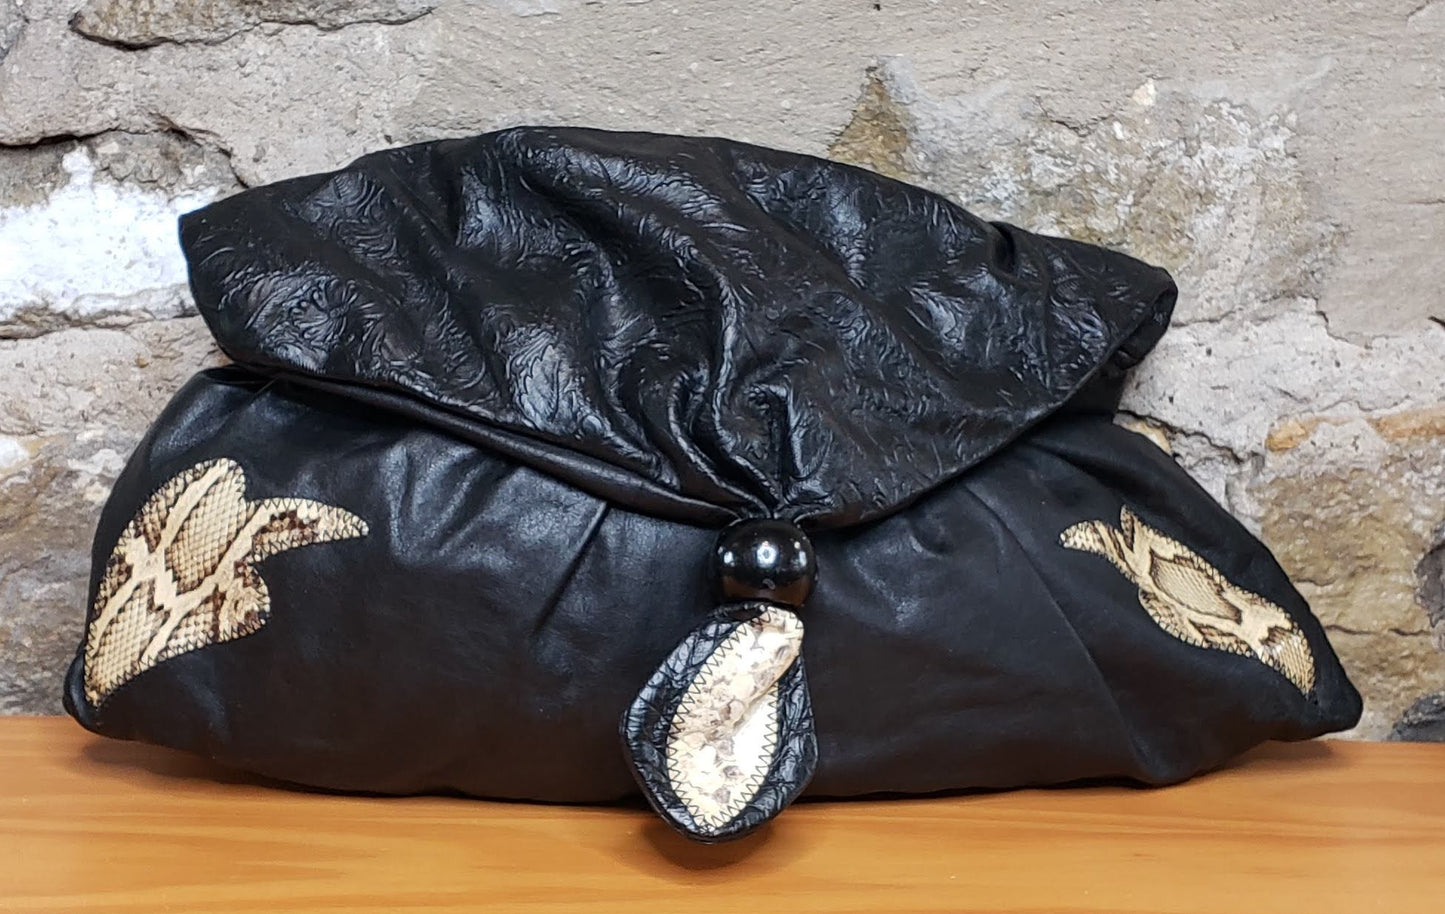 Vintage Leather and Snakeskin Clutch